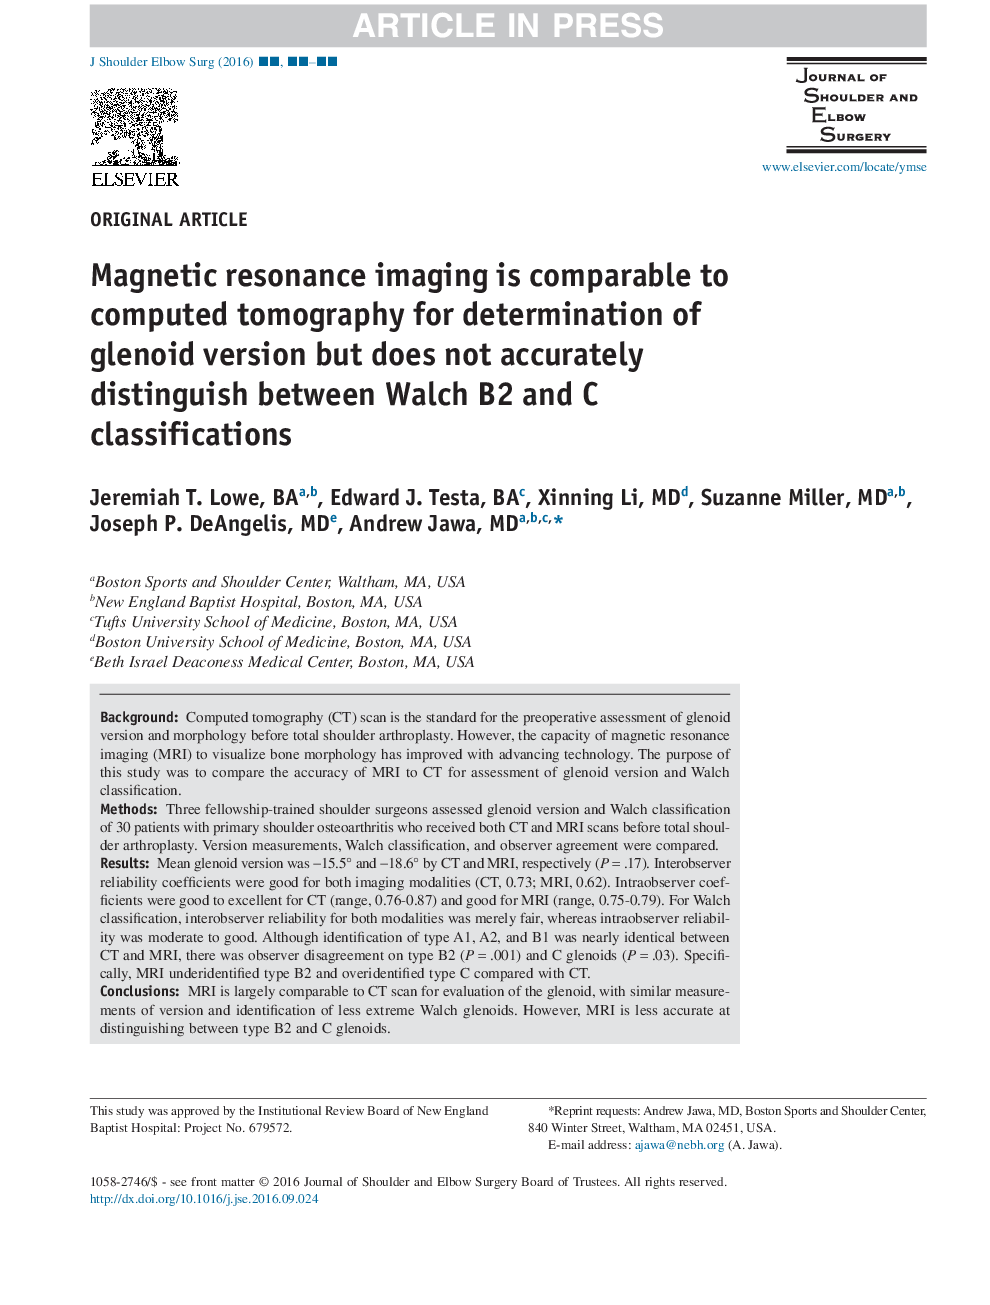 Magnetic resonance imaging is comparable to computed tomography for determination of glenoid version but does not accurately distinguish between Walch B2 and C classifications